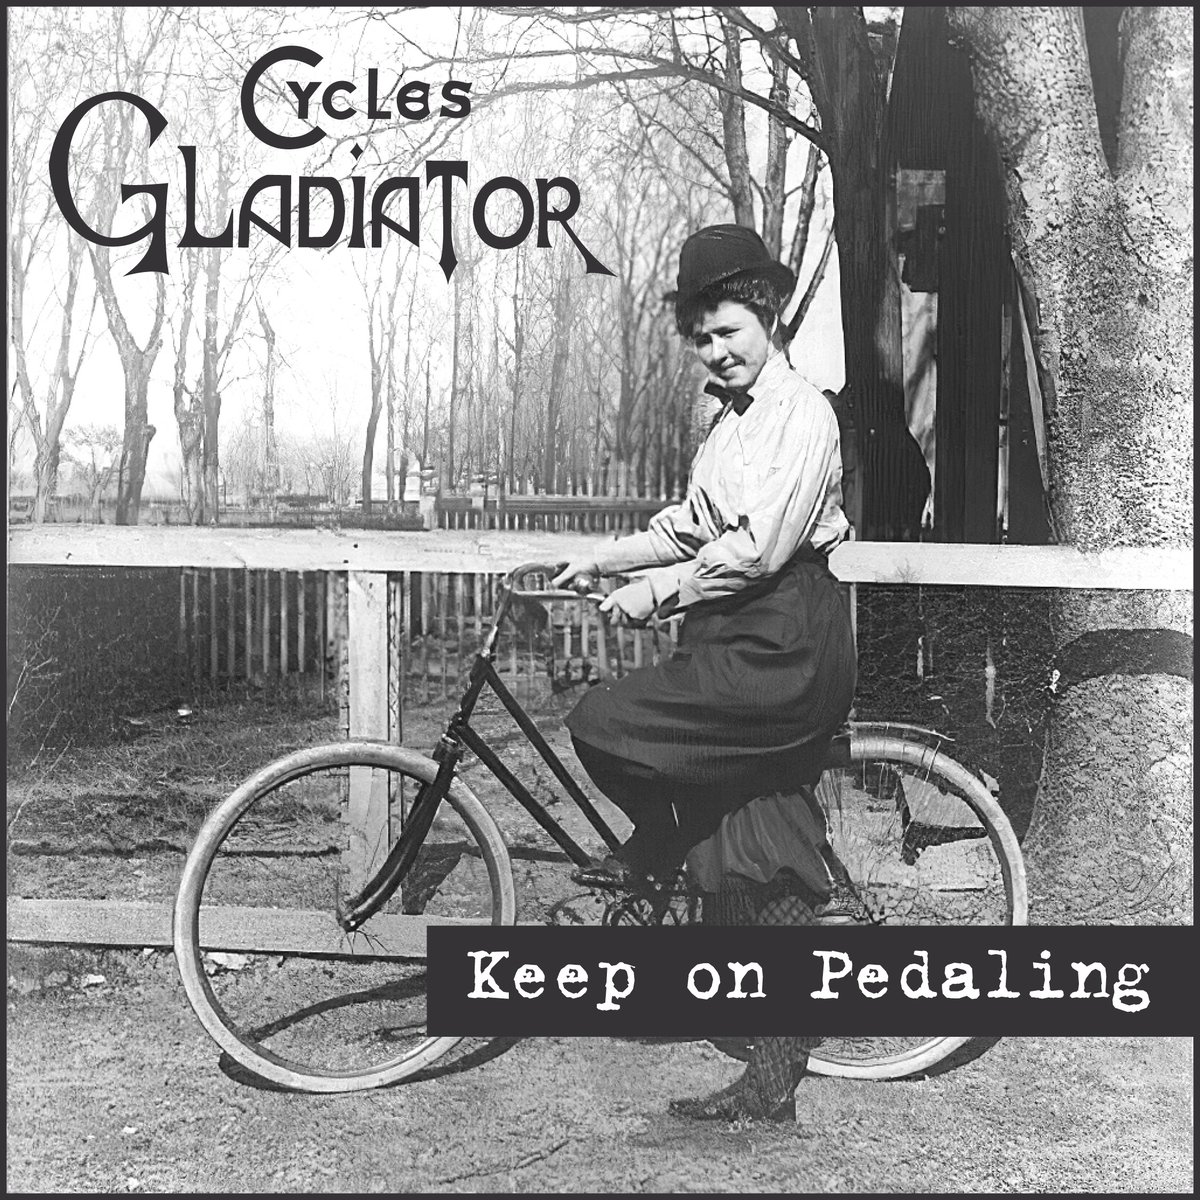 Did you know the bicycle’s invention freed women from chaperones and other restrictions? That’s the power of the pedal. #cyclesofchange  #CyclesGladiatorWine